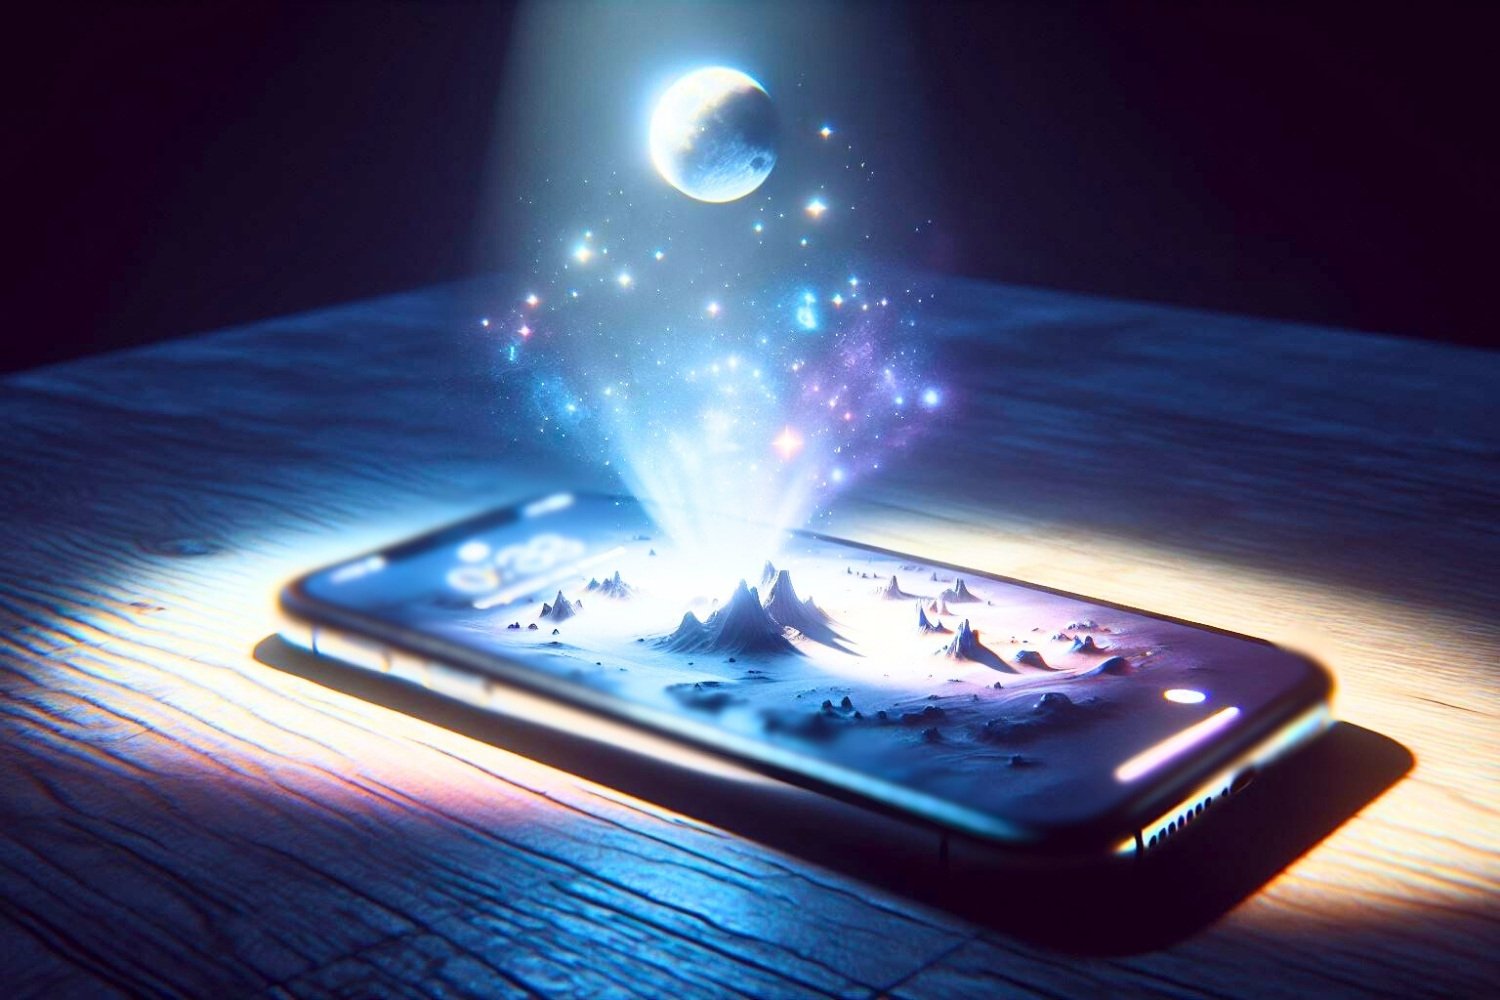 iPhone hologramme